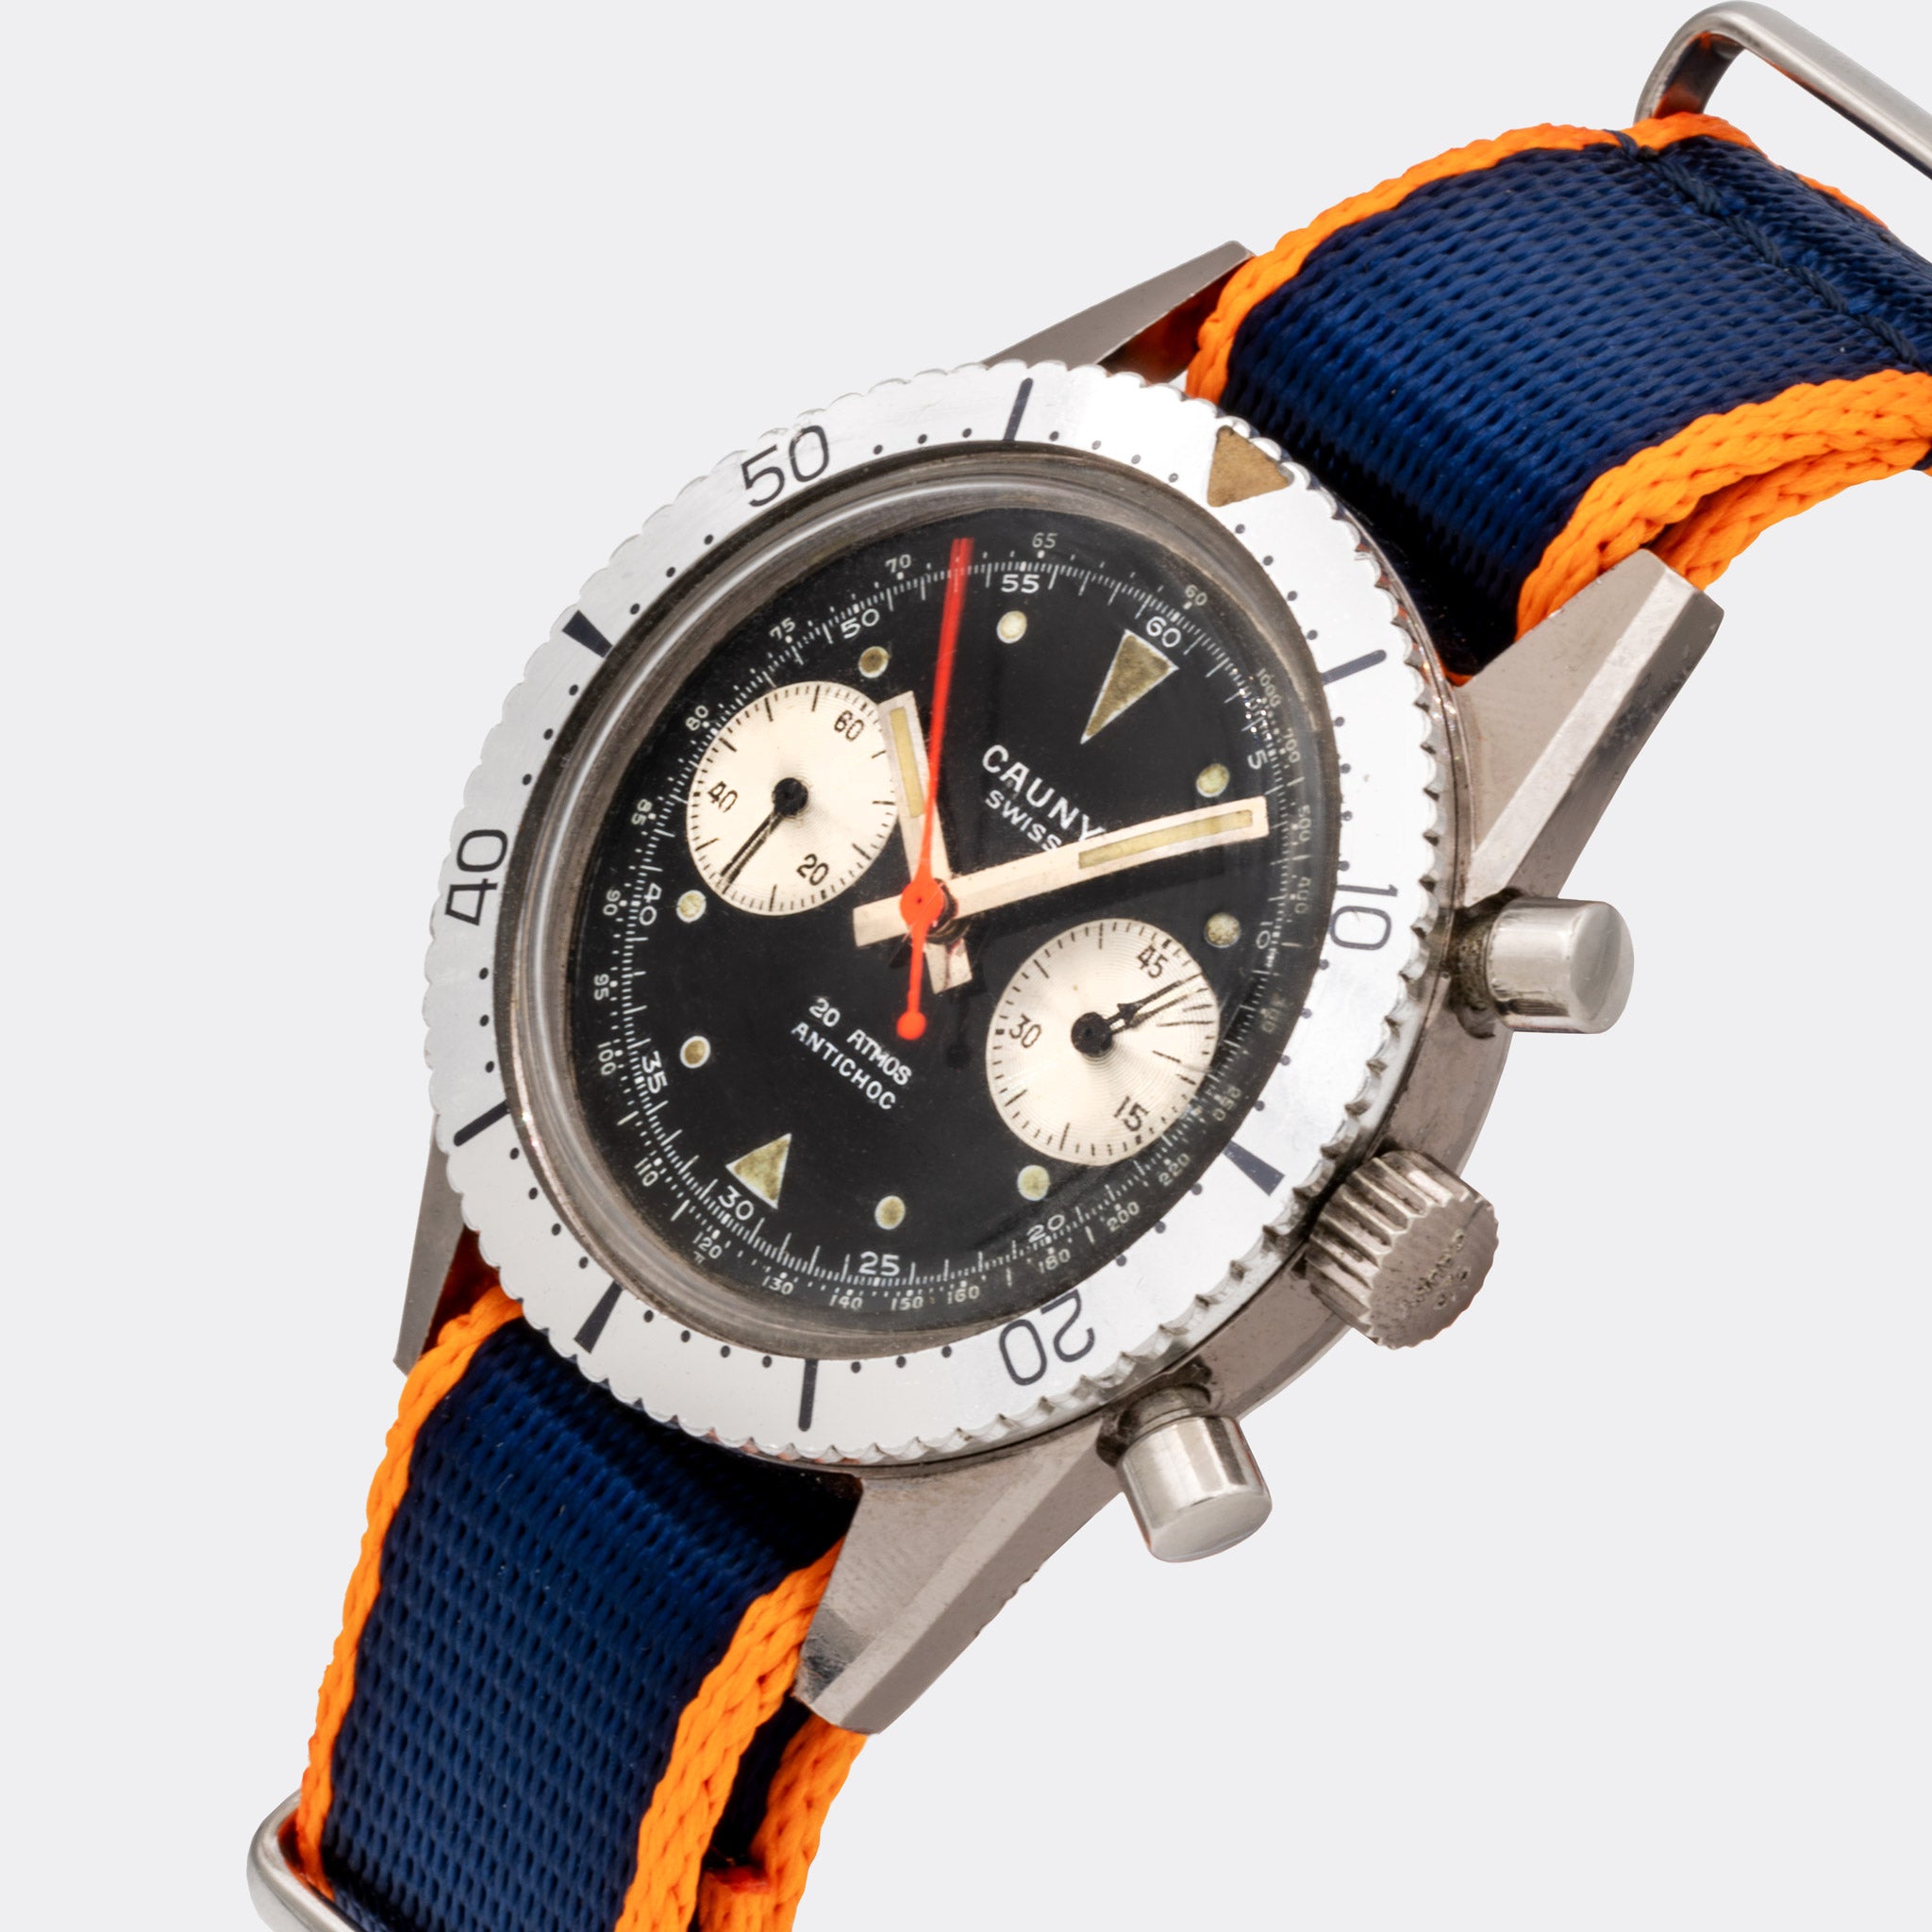 CAUNY | Swiss Diver Chronograph De Luxe | Red Second | Tritium Dial | Automatic | 1970s